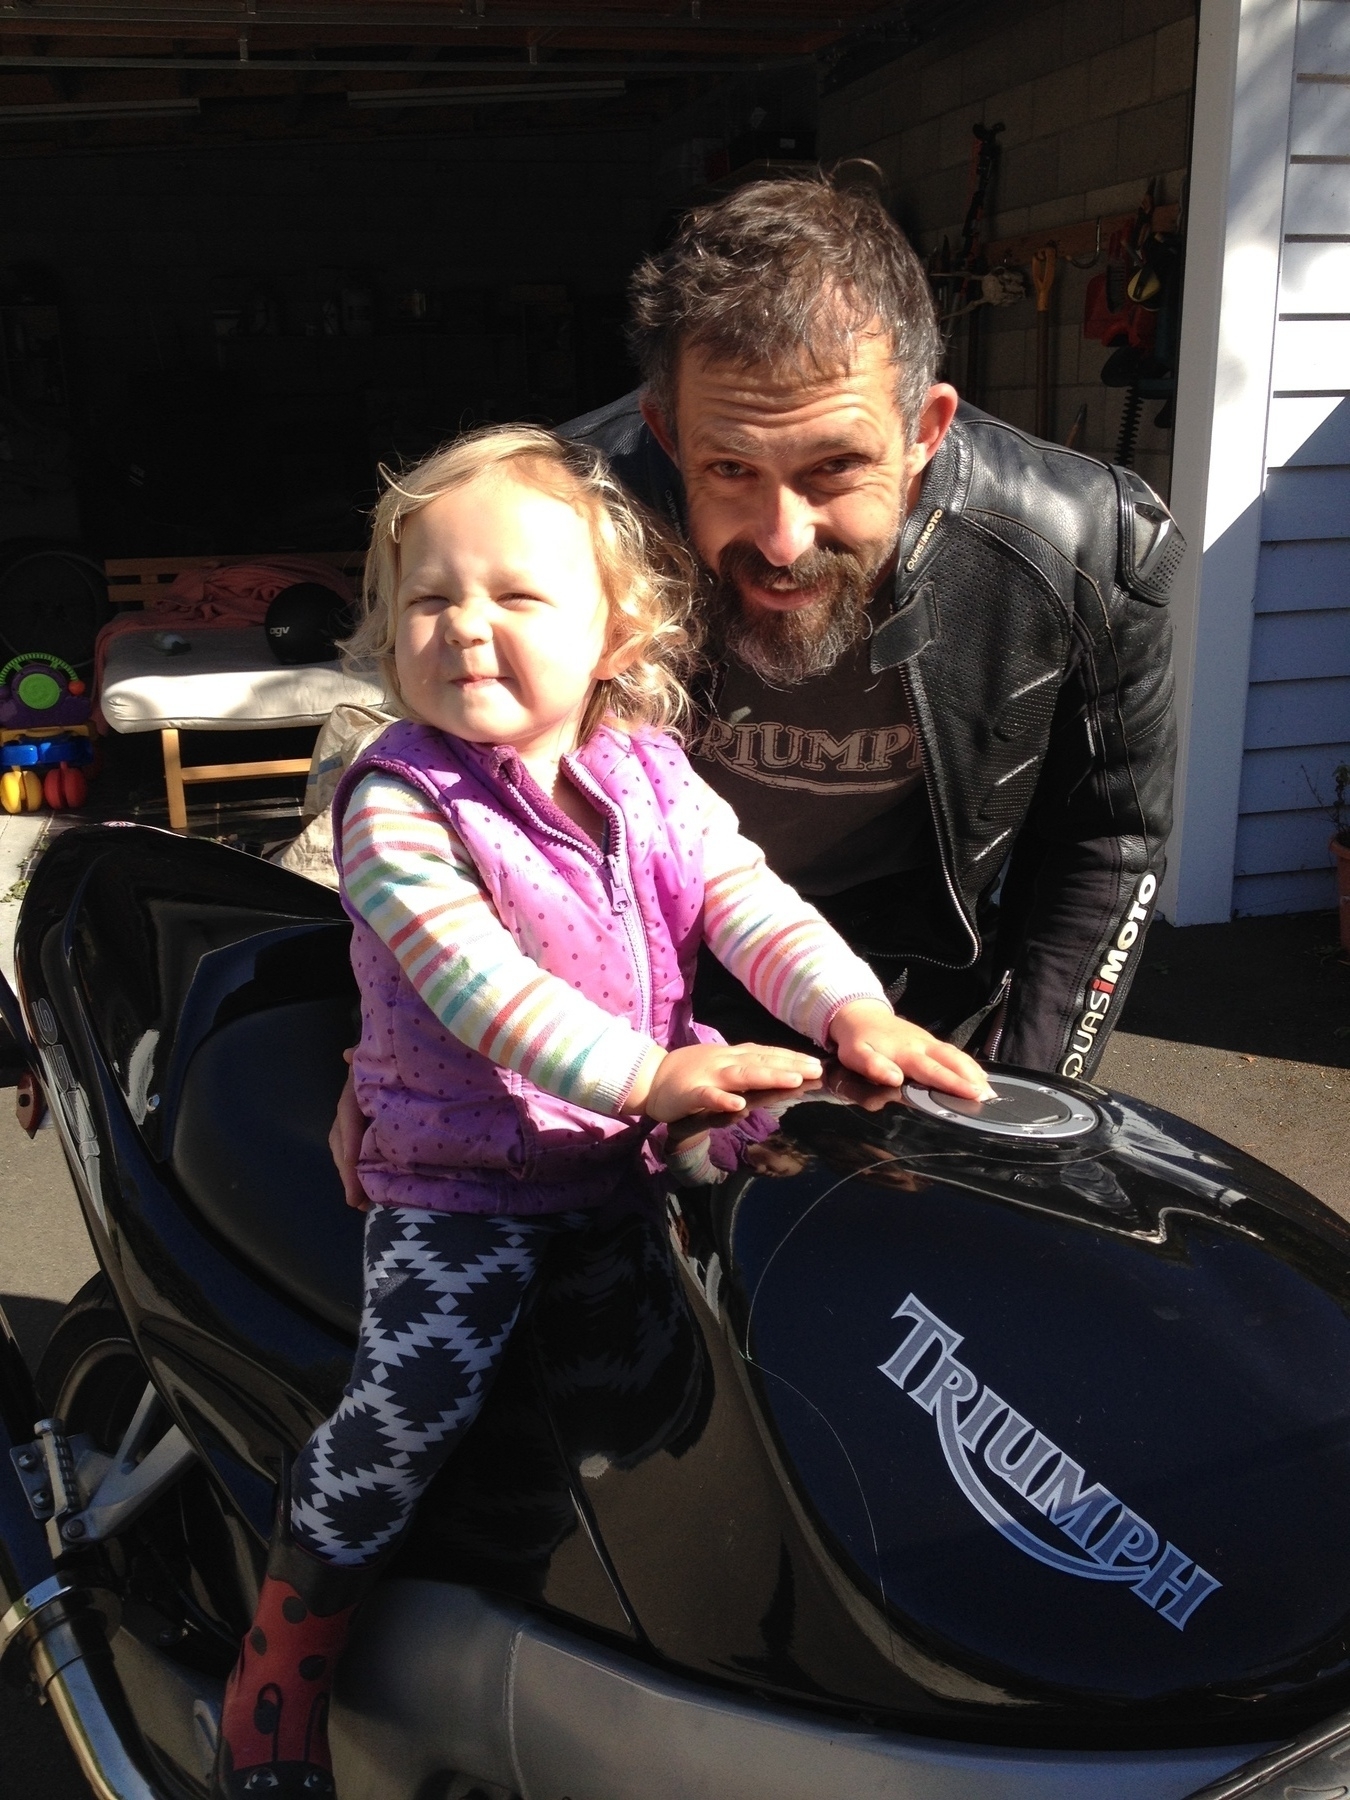 A little girl is excited to be on a triumph sprint RS while her dad stands beside her smiling